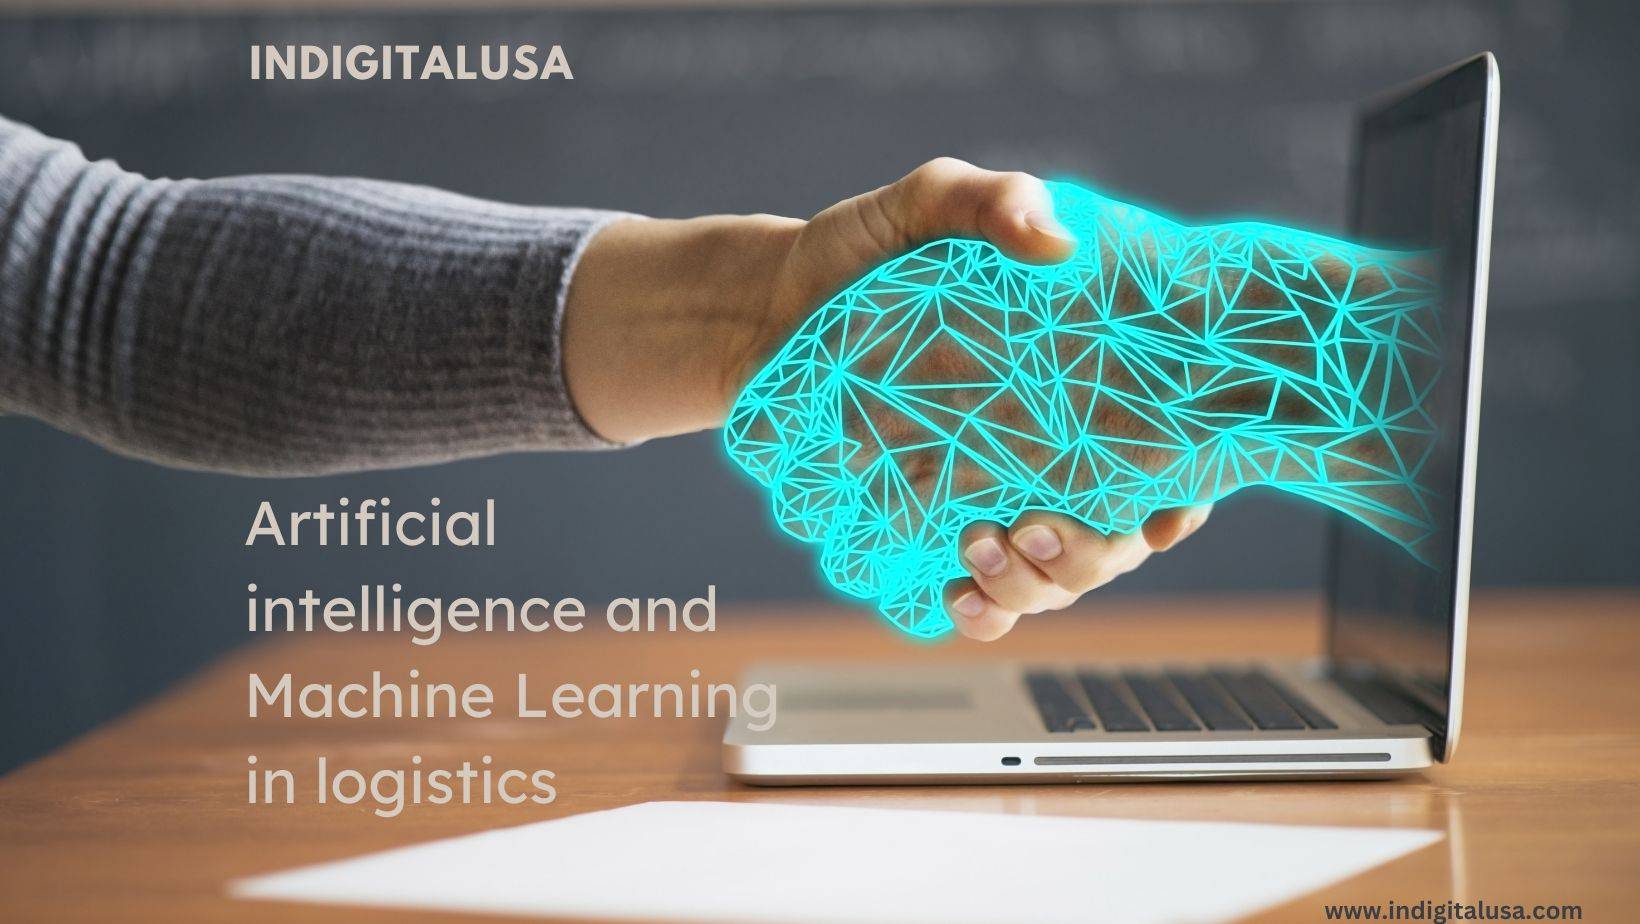 Artificial intelligence and Machine Learning in logistics